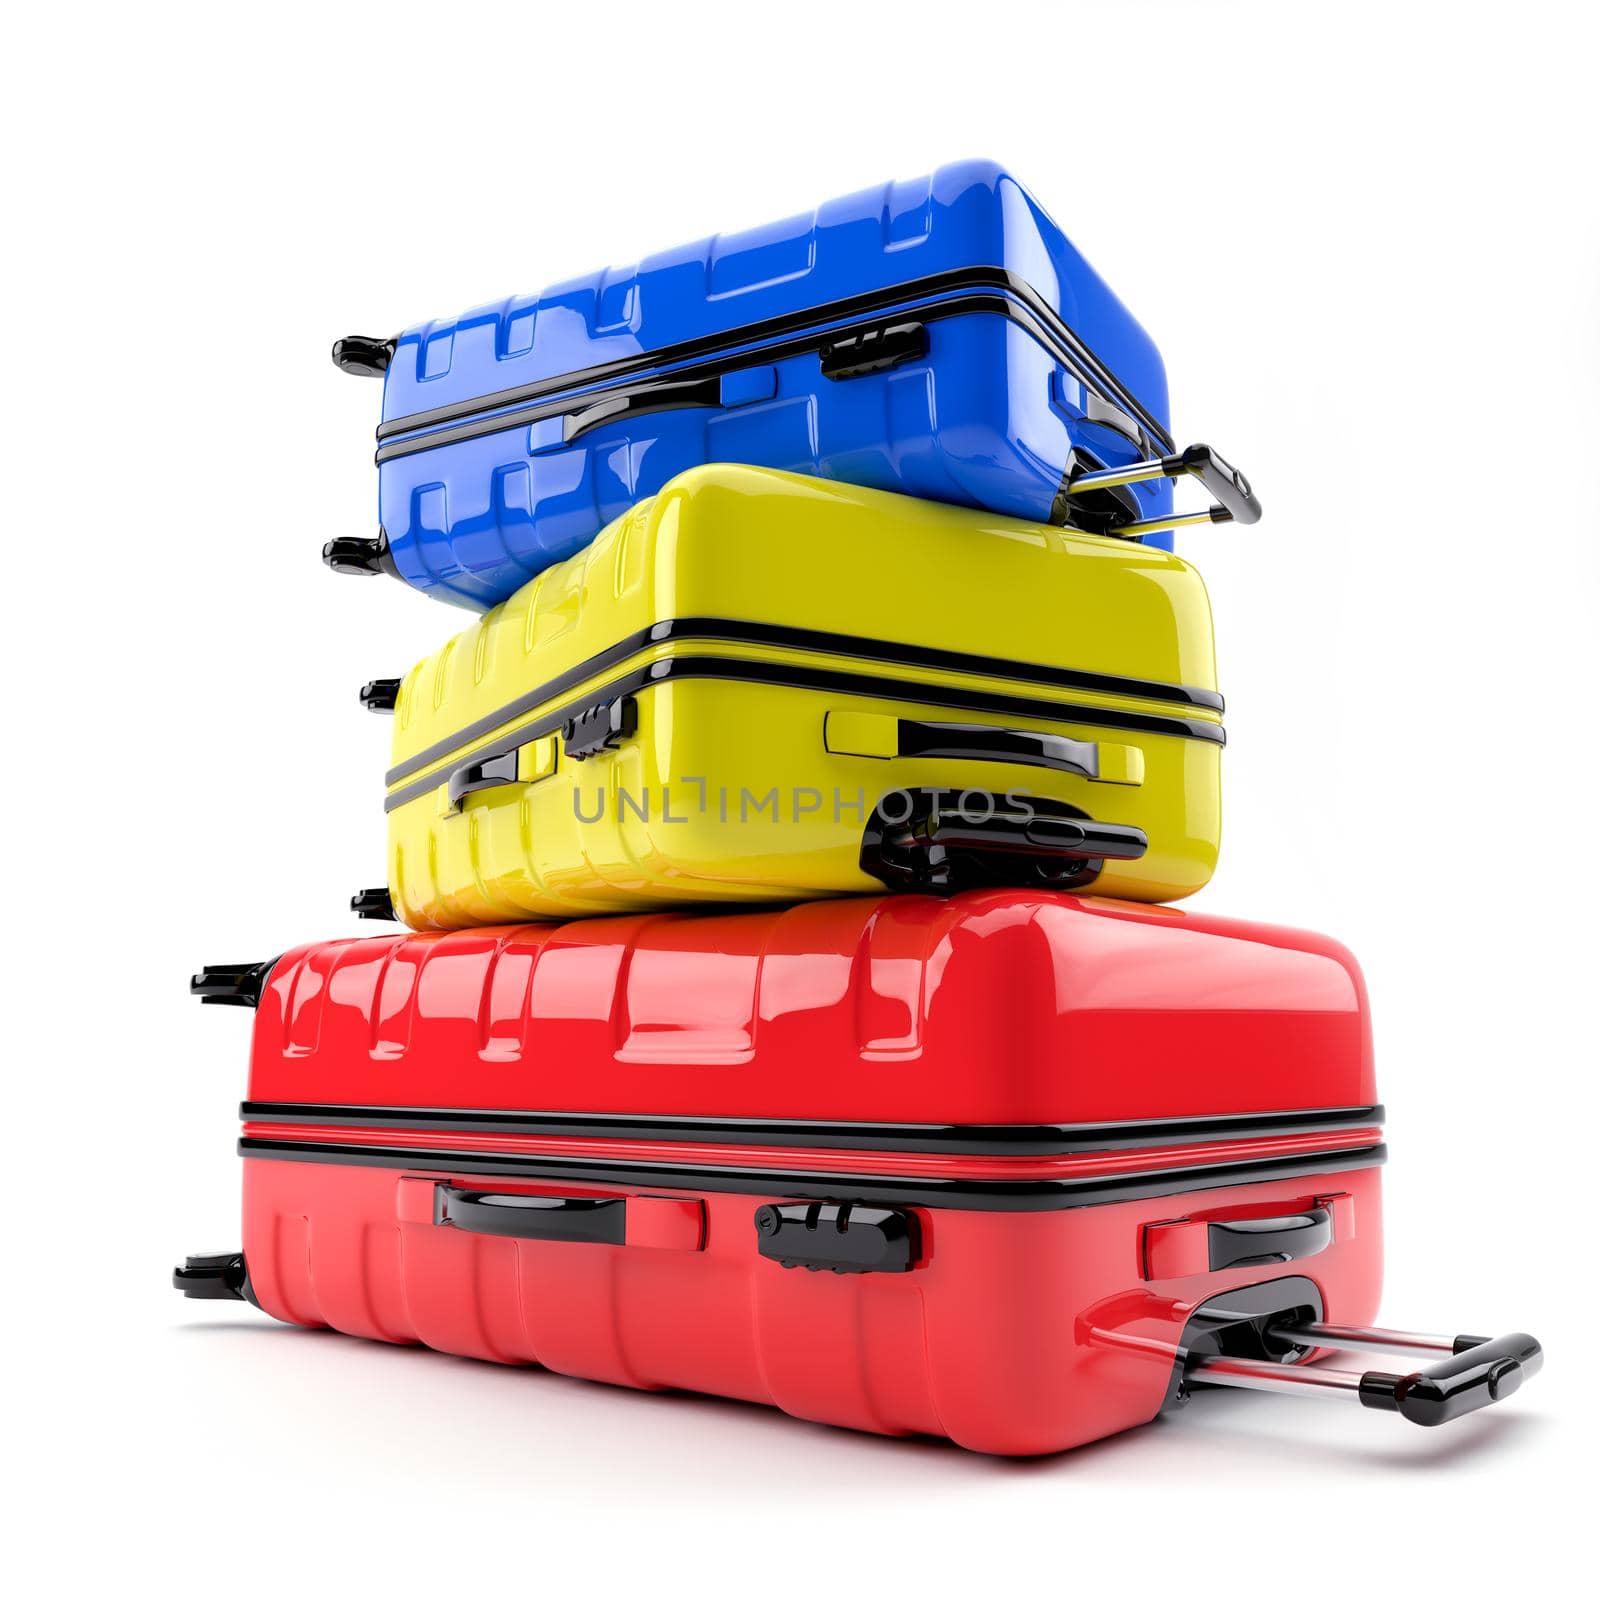 A stack of colorful suitcases by Valentyn